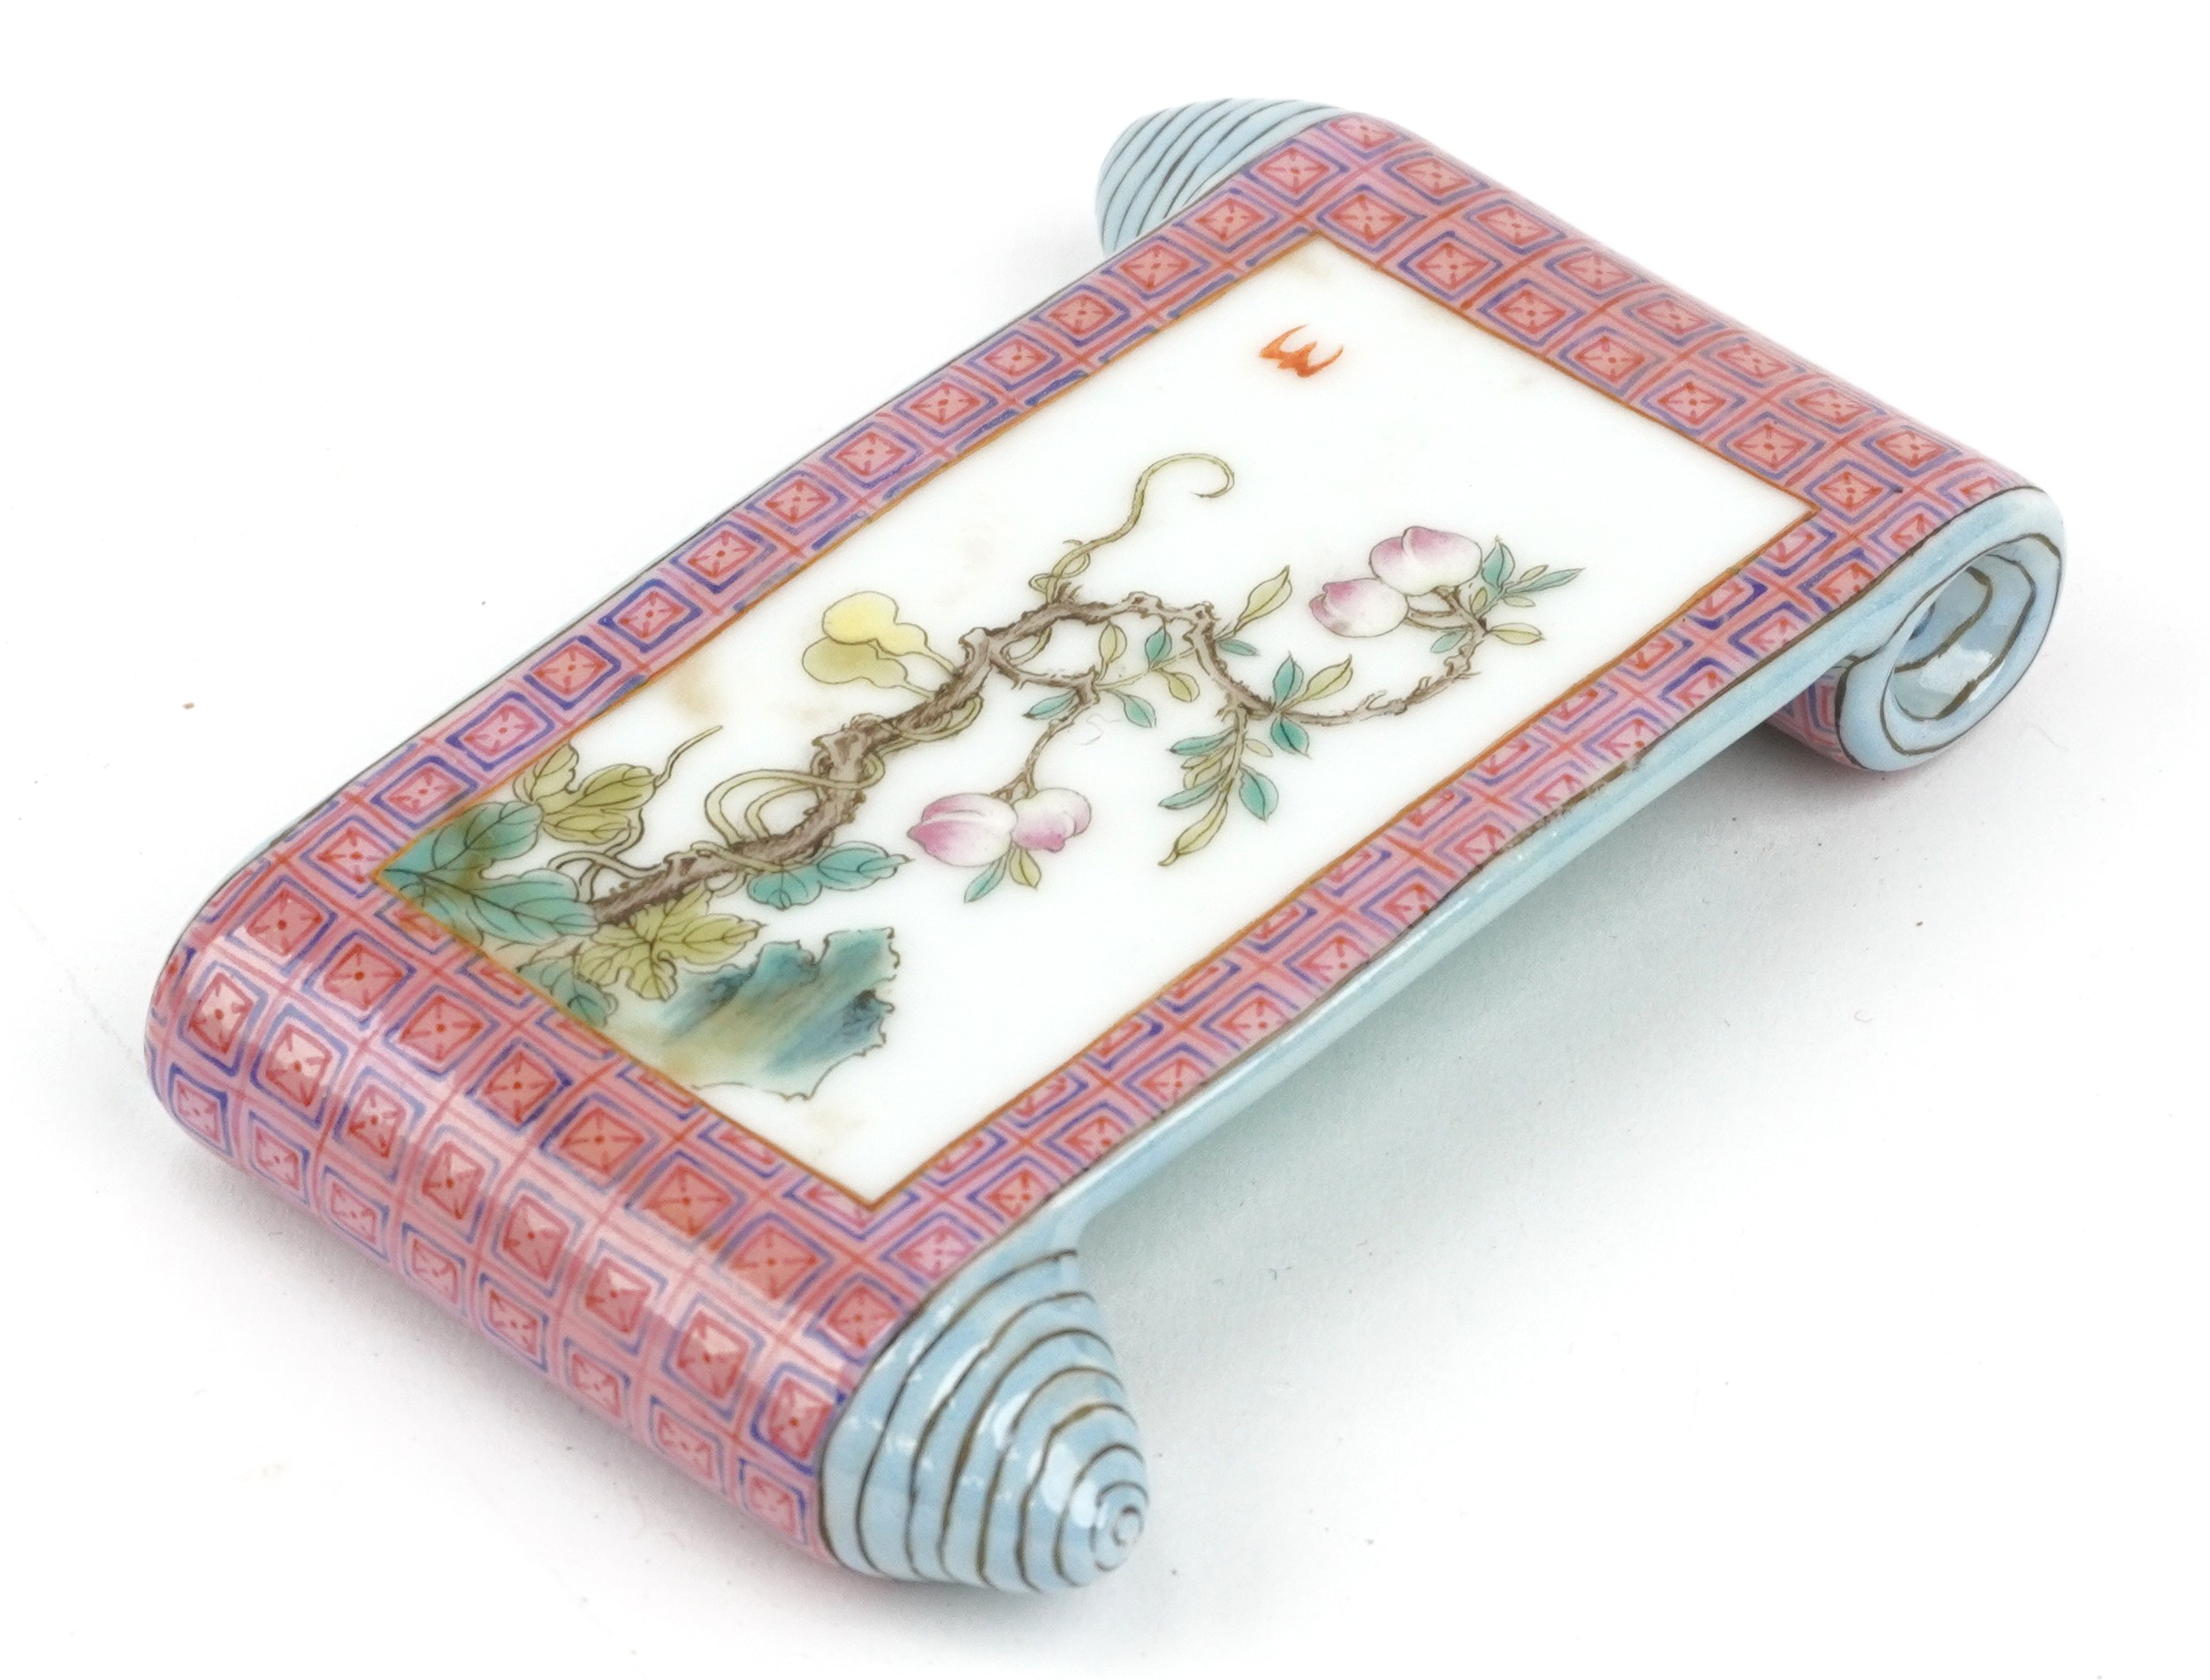 Chinese porcelain scholar's wrist rest in the form of a scroll hand painted in the famille rose